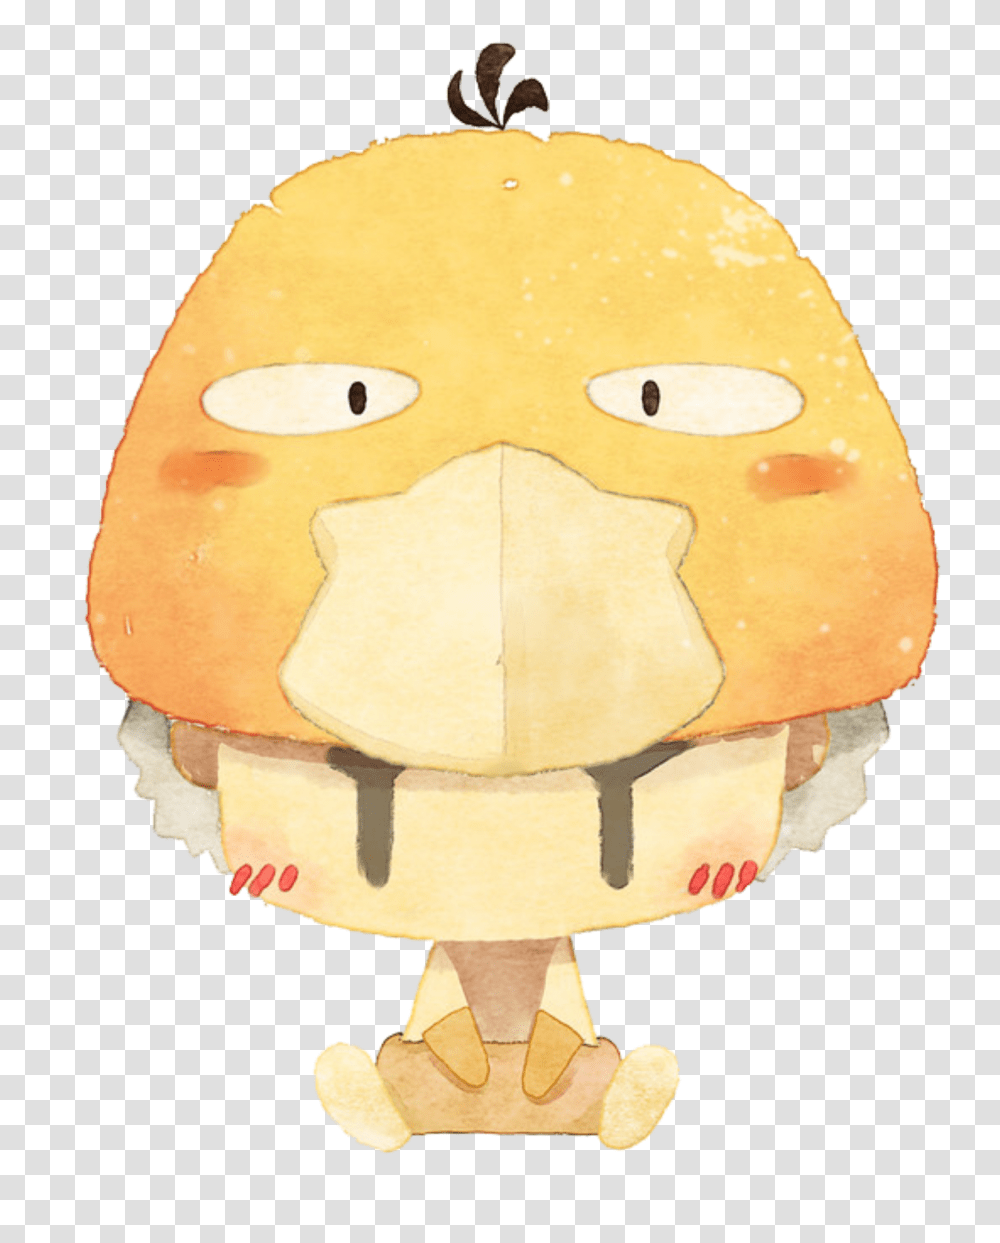 Popular And Trending Psyduck Stickers, Food, Sweets, Dessert, Cream Transparent Png